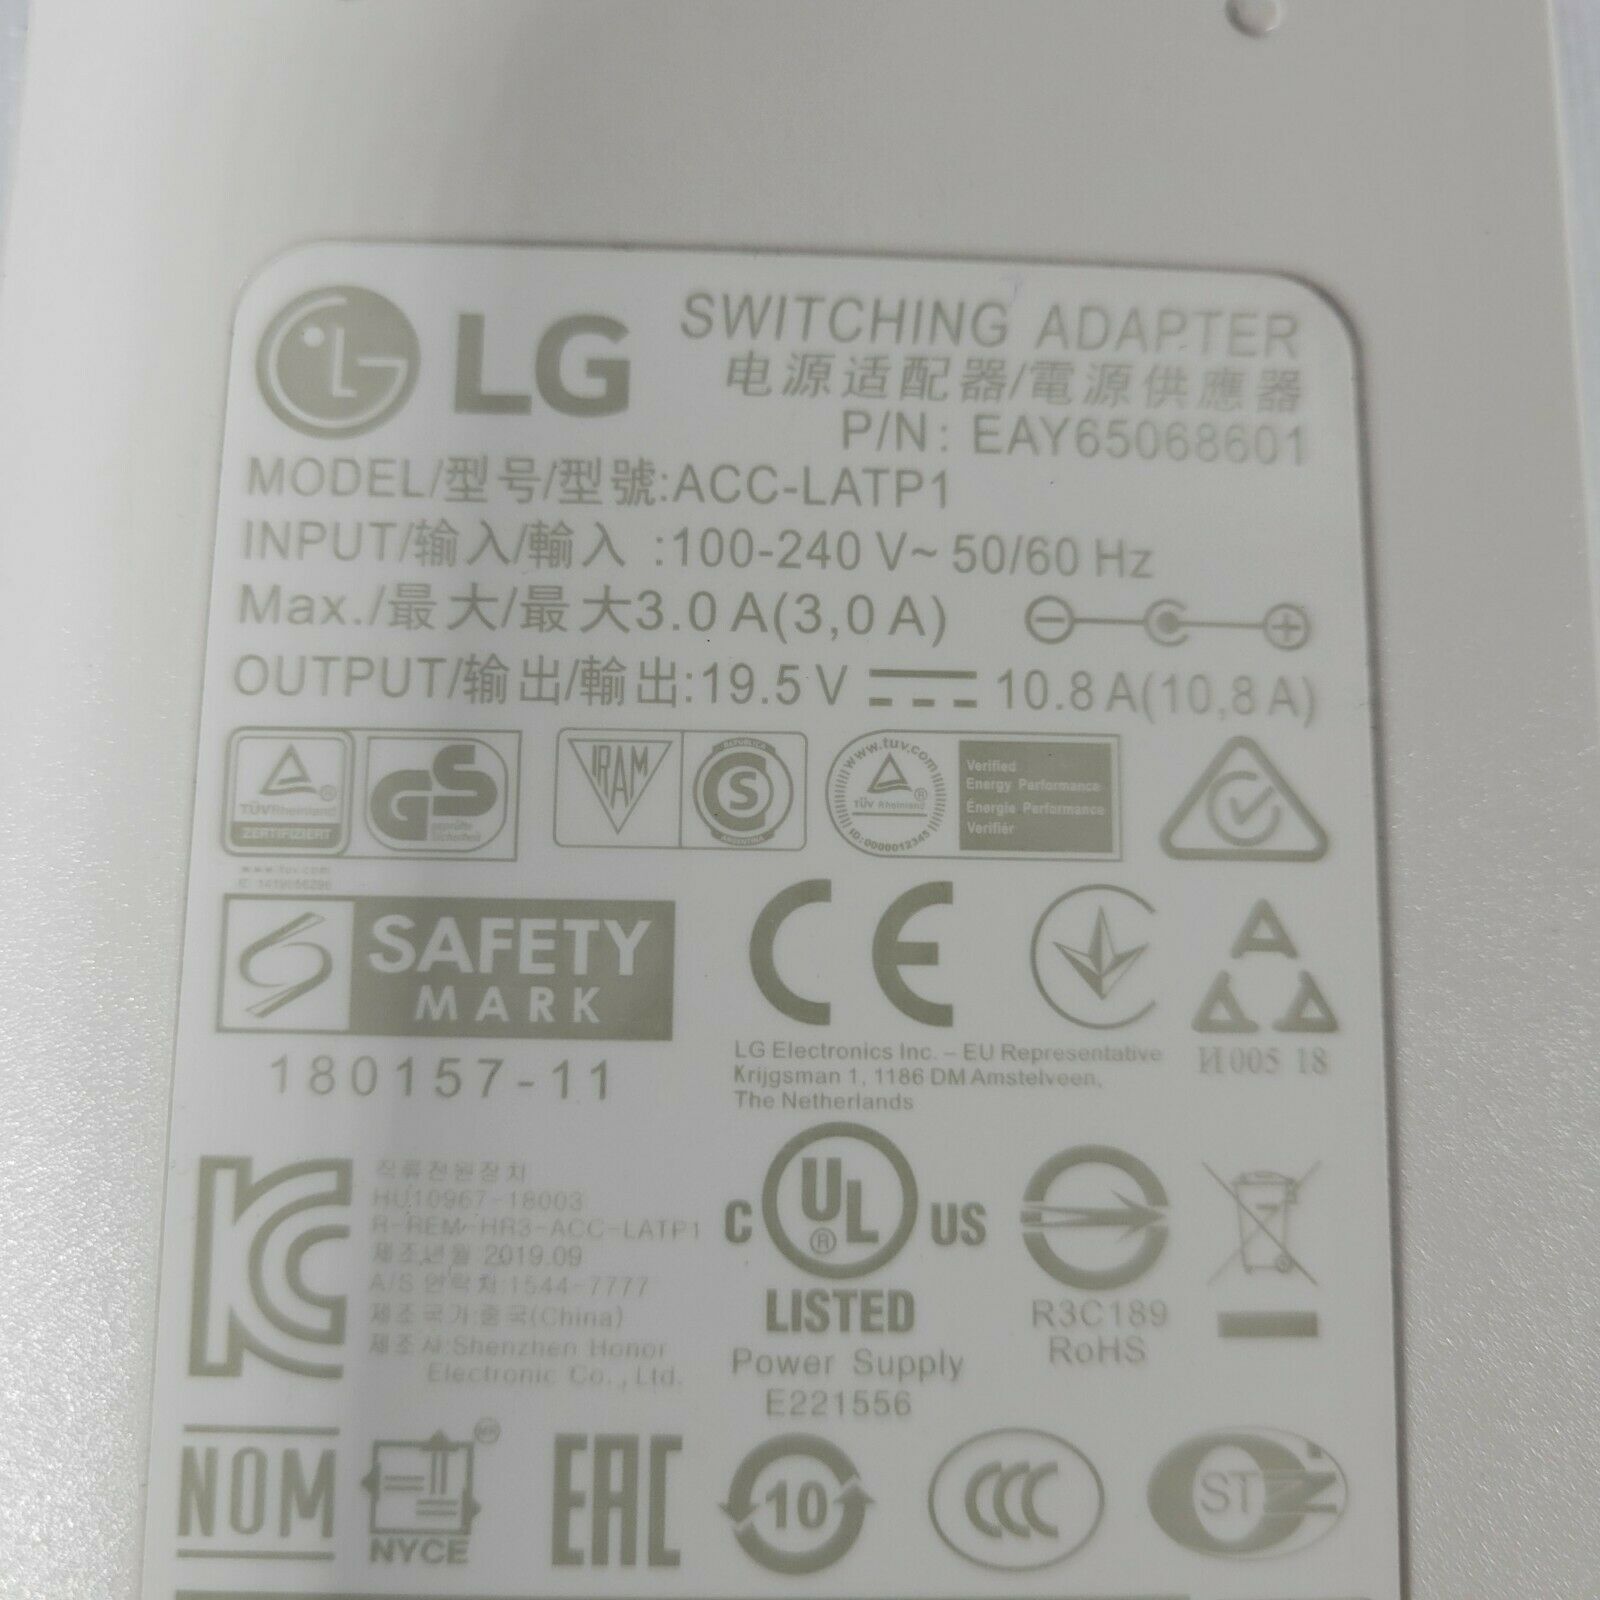 *Brand NEW* LG ACC-LATP1 Charger 19.5V AC Country/Region of Manufacture: China Cu SWITCHING ADAPTER